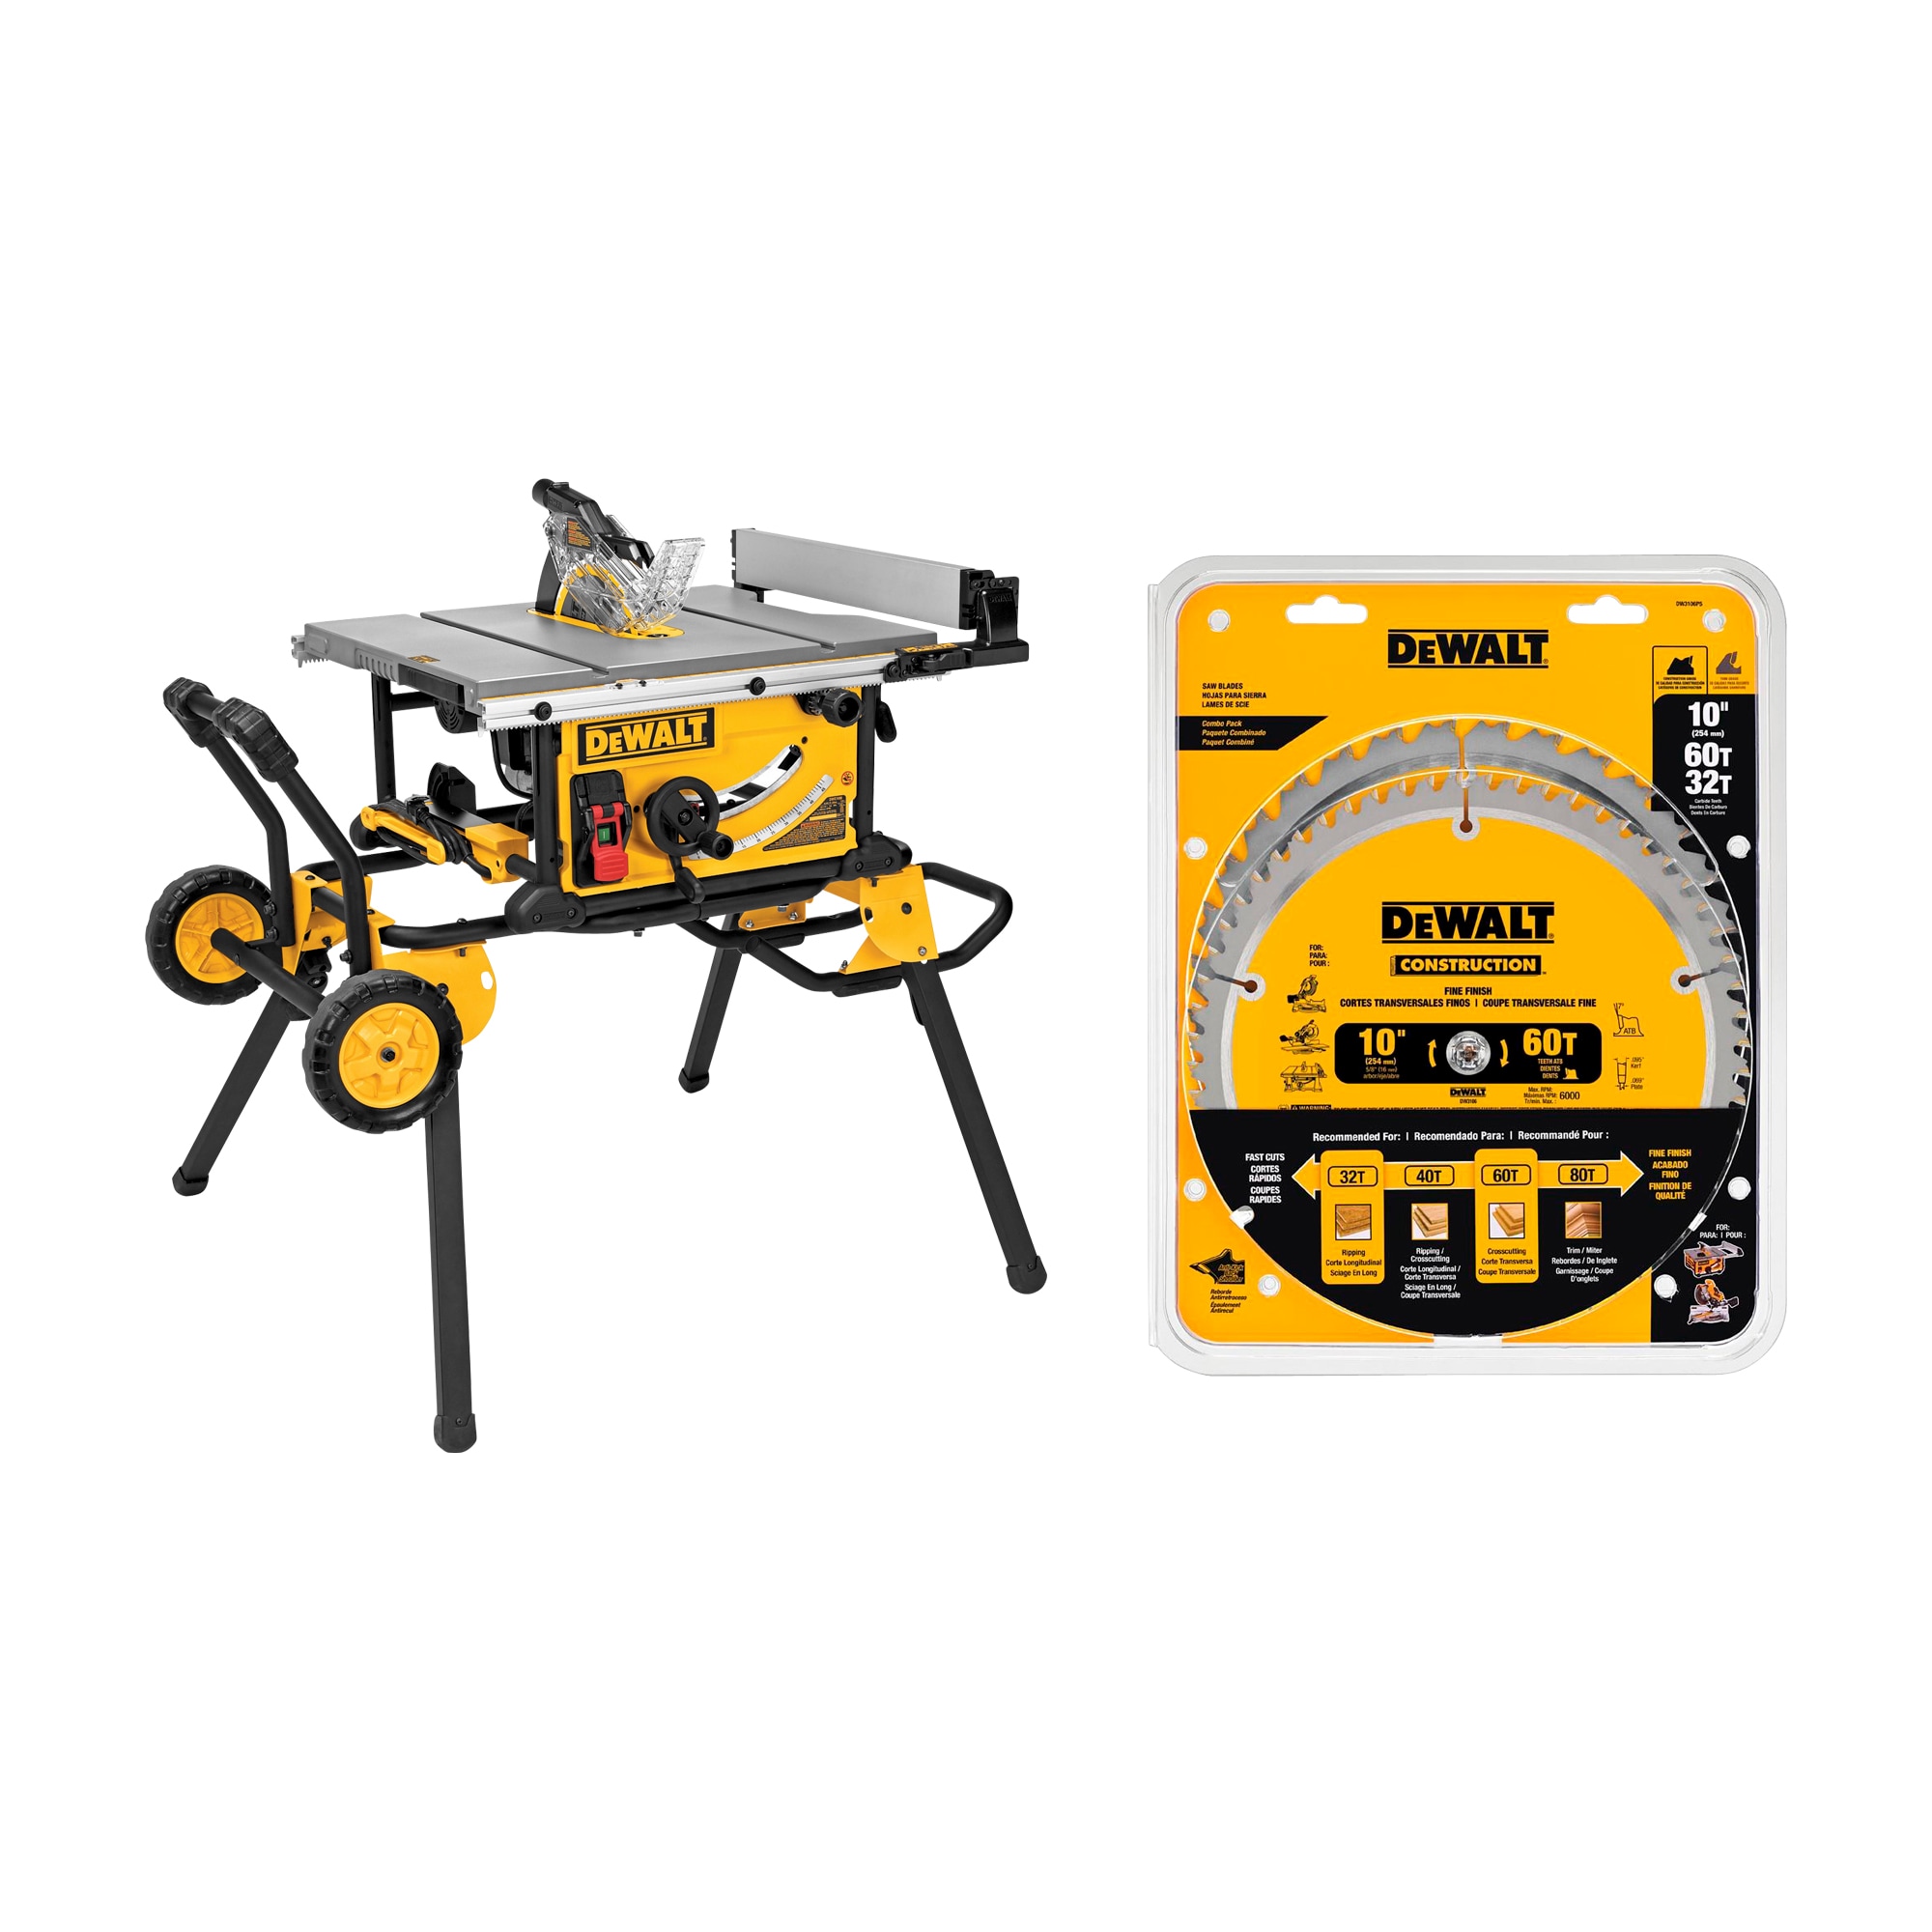 DEWALT 10-in Carbide-Tipped Blade 15-Amp Portable Table Saw & Construction 10-in 32 and 60-Tooth Carbide Miter/Table Saw Blade Set